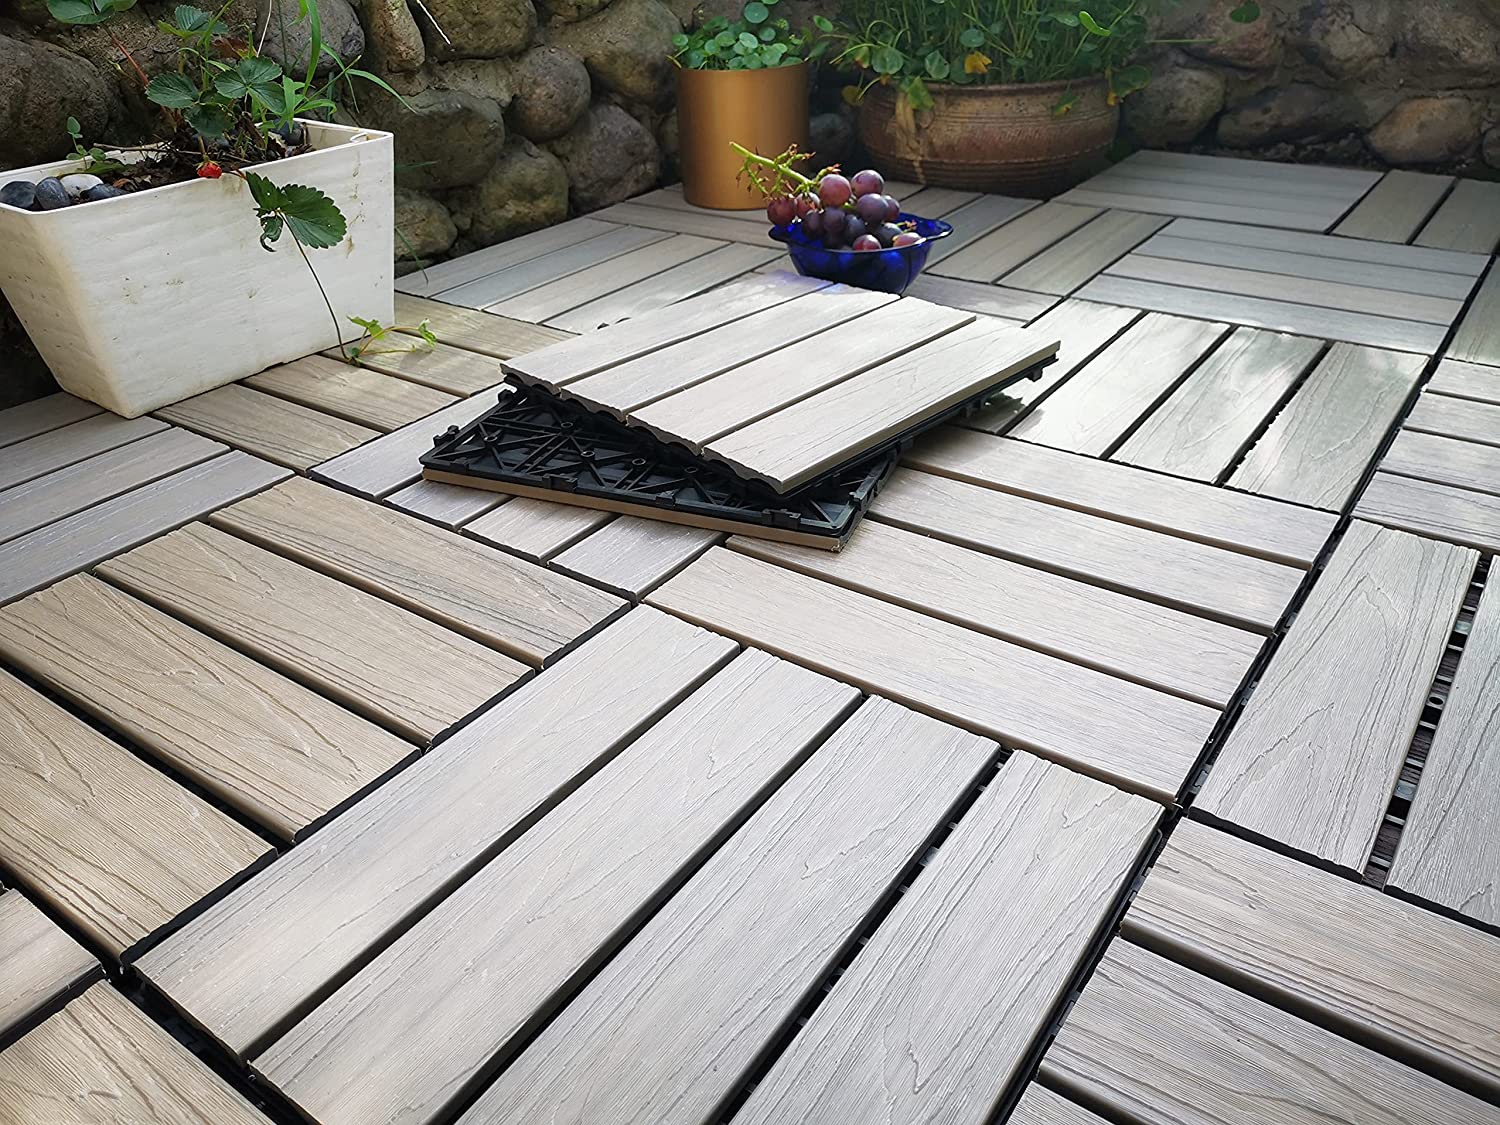 Temporary interlocking floor tiles for outdoor areas with grass